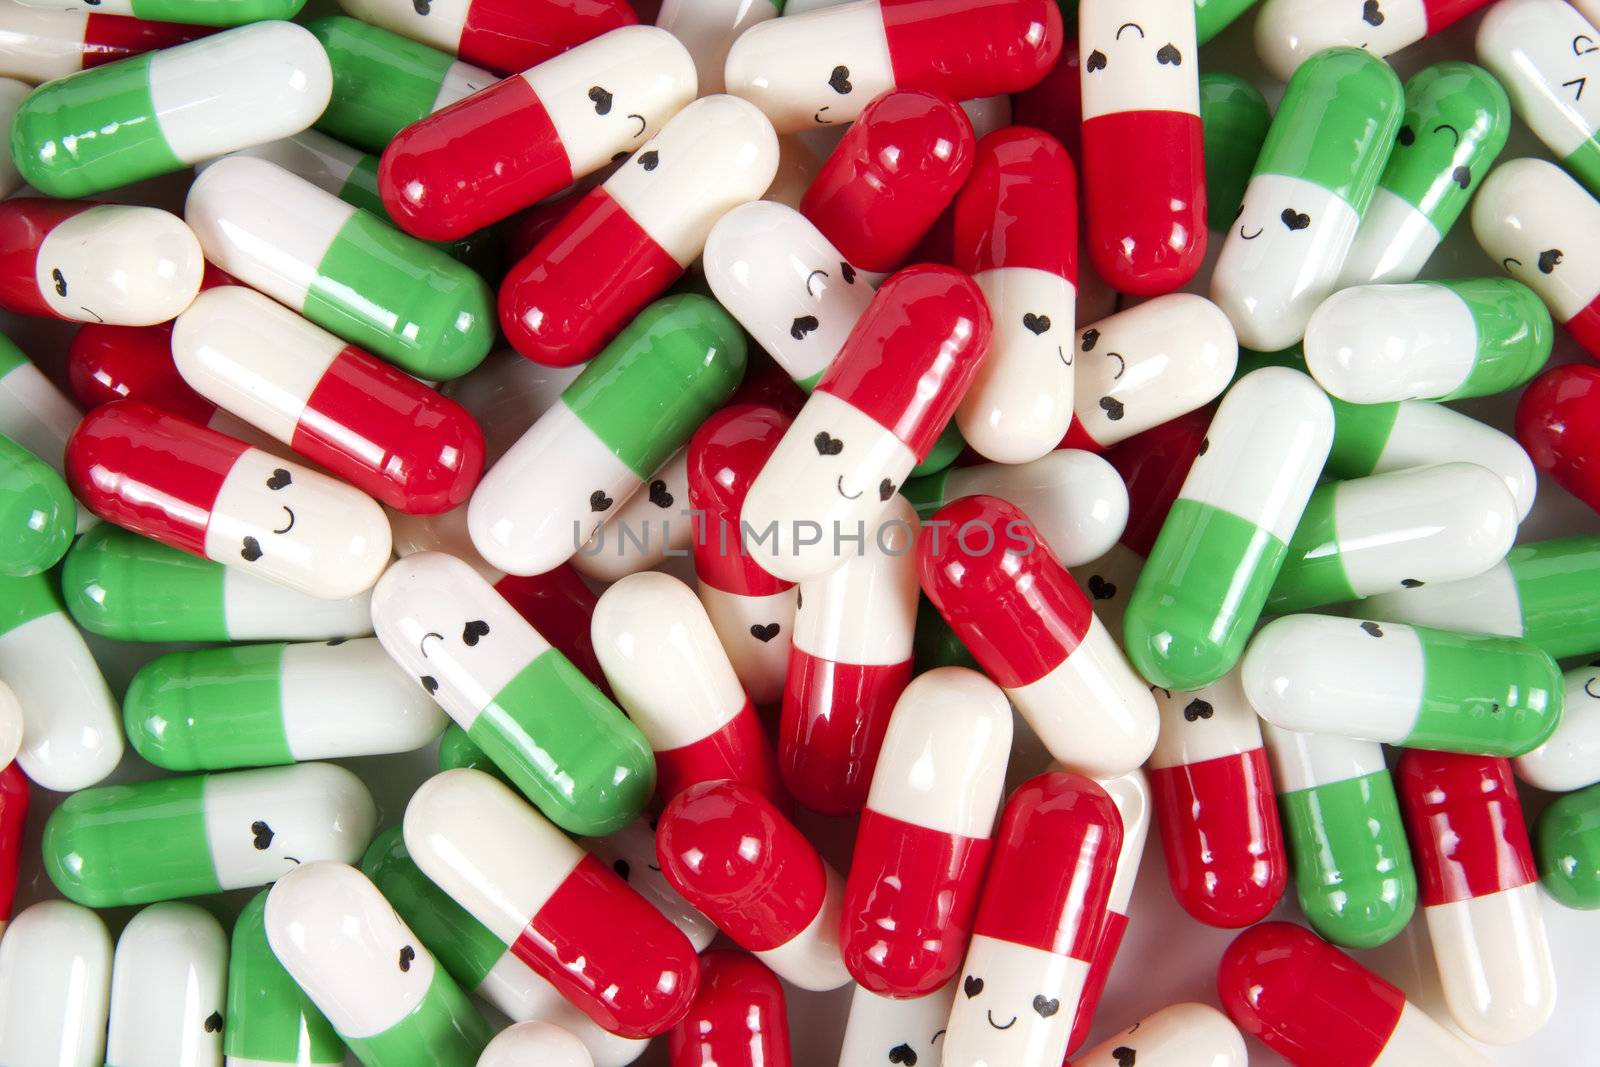 Green red and white happy emotion capsules on white background 